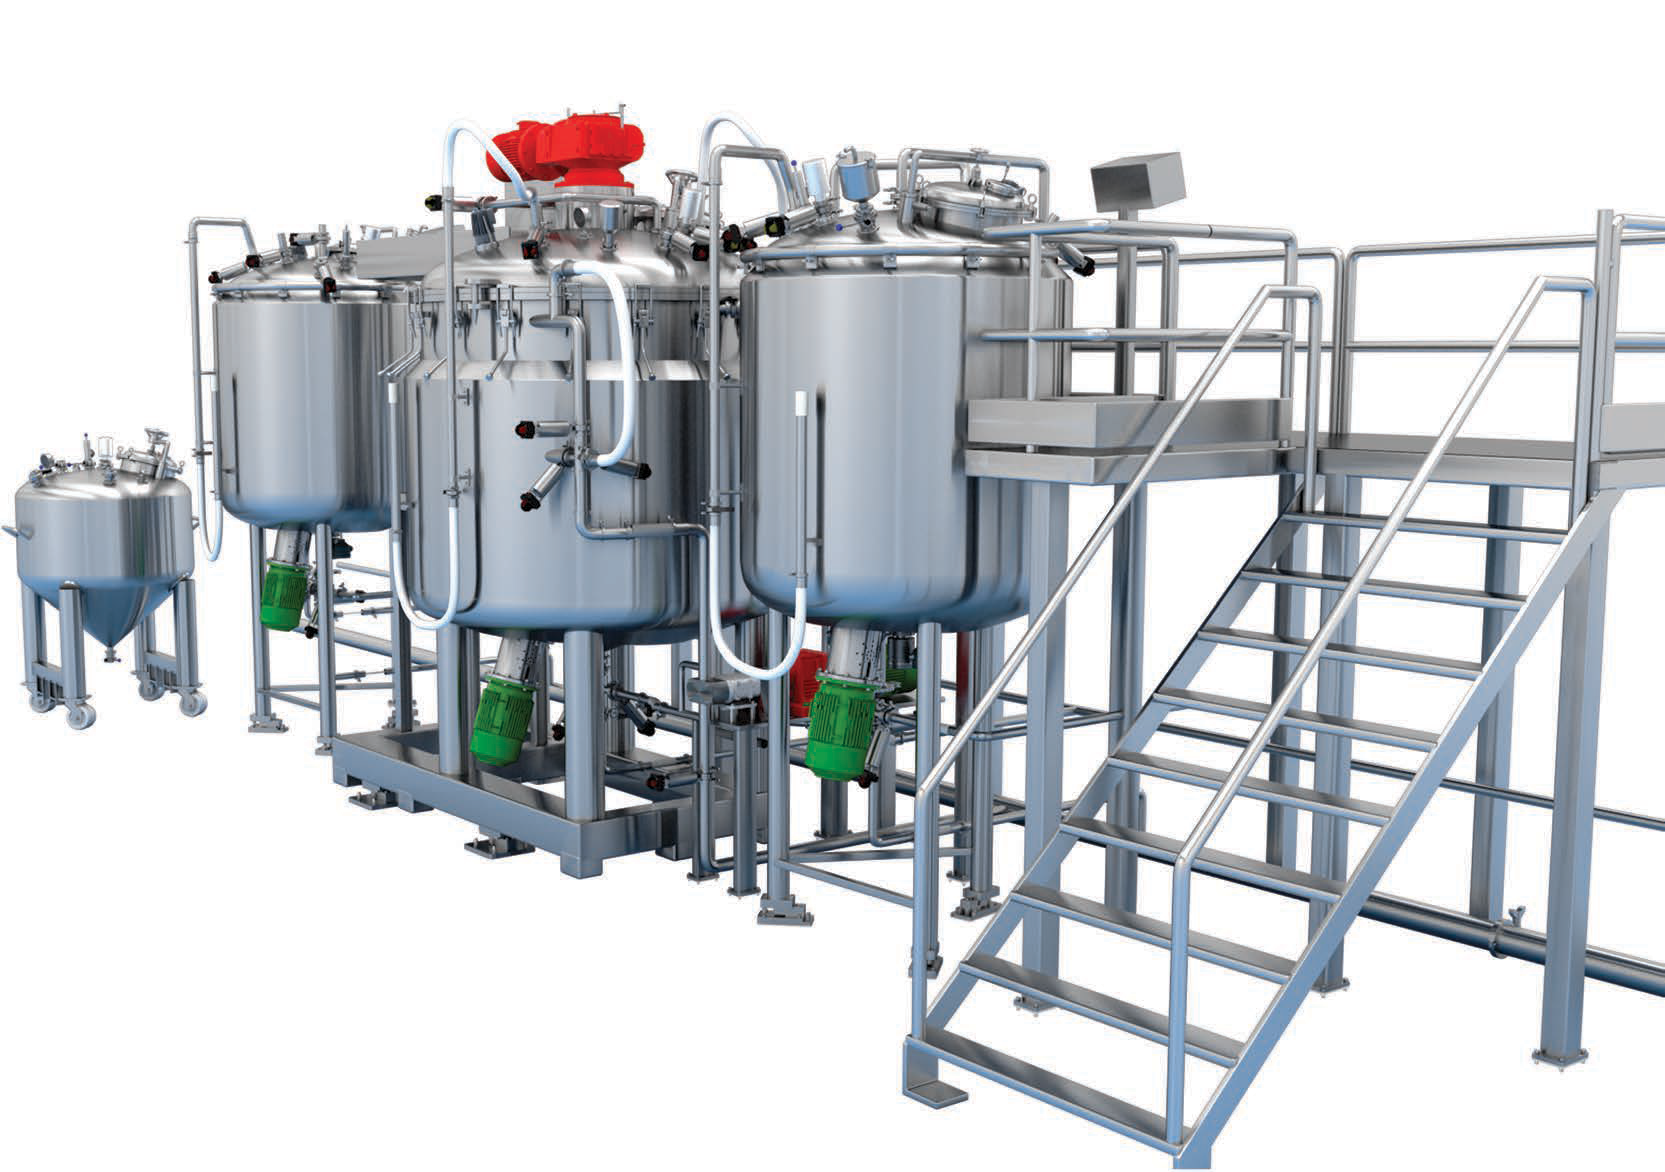 Ointment & Cream Processing Systems